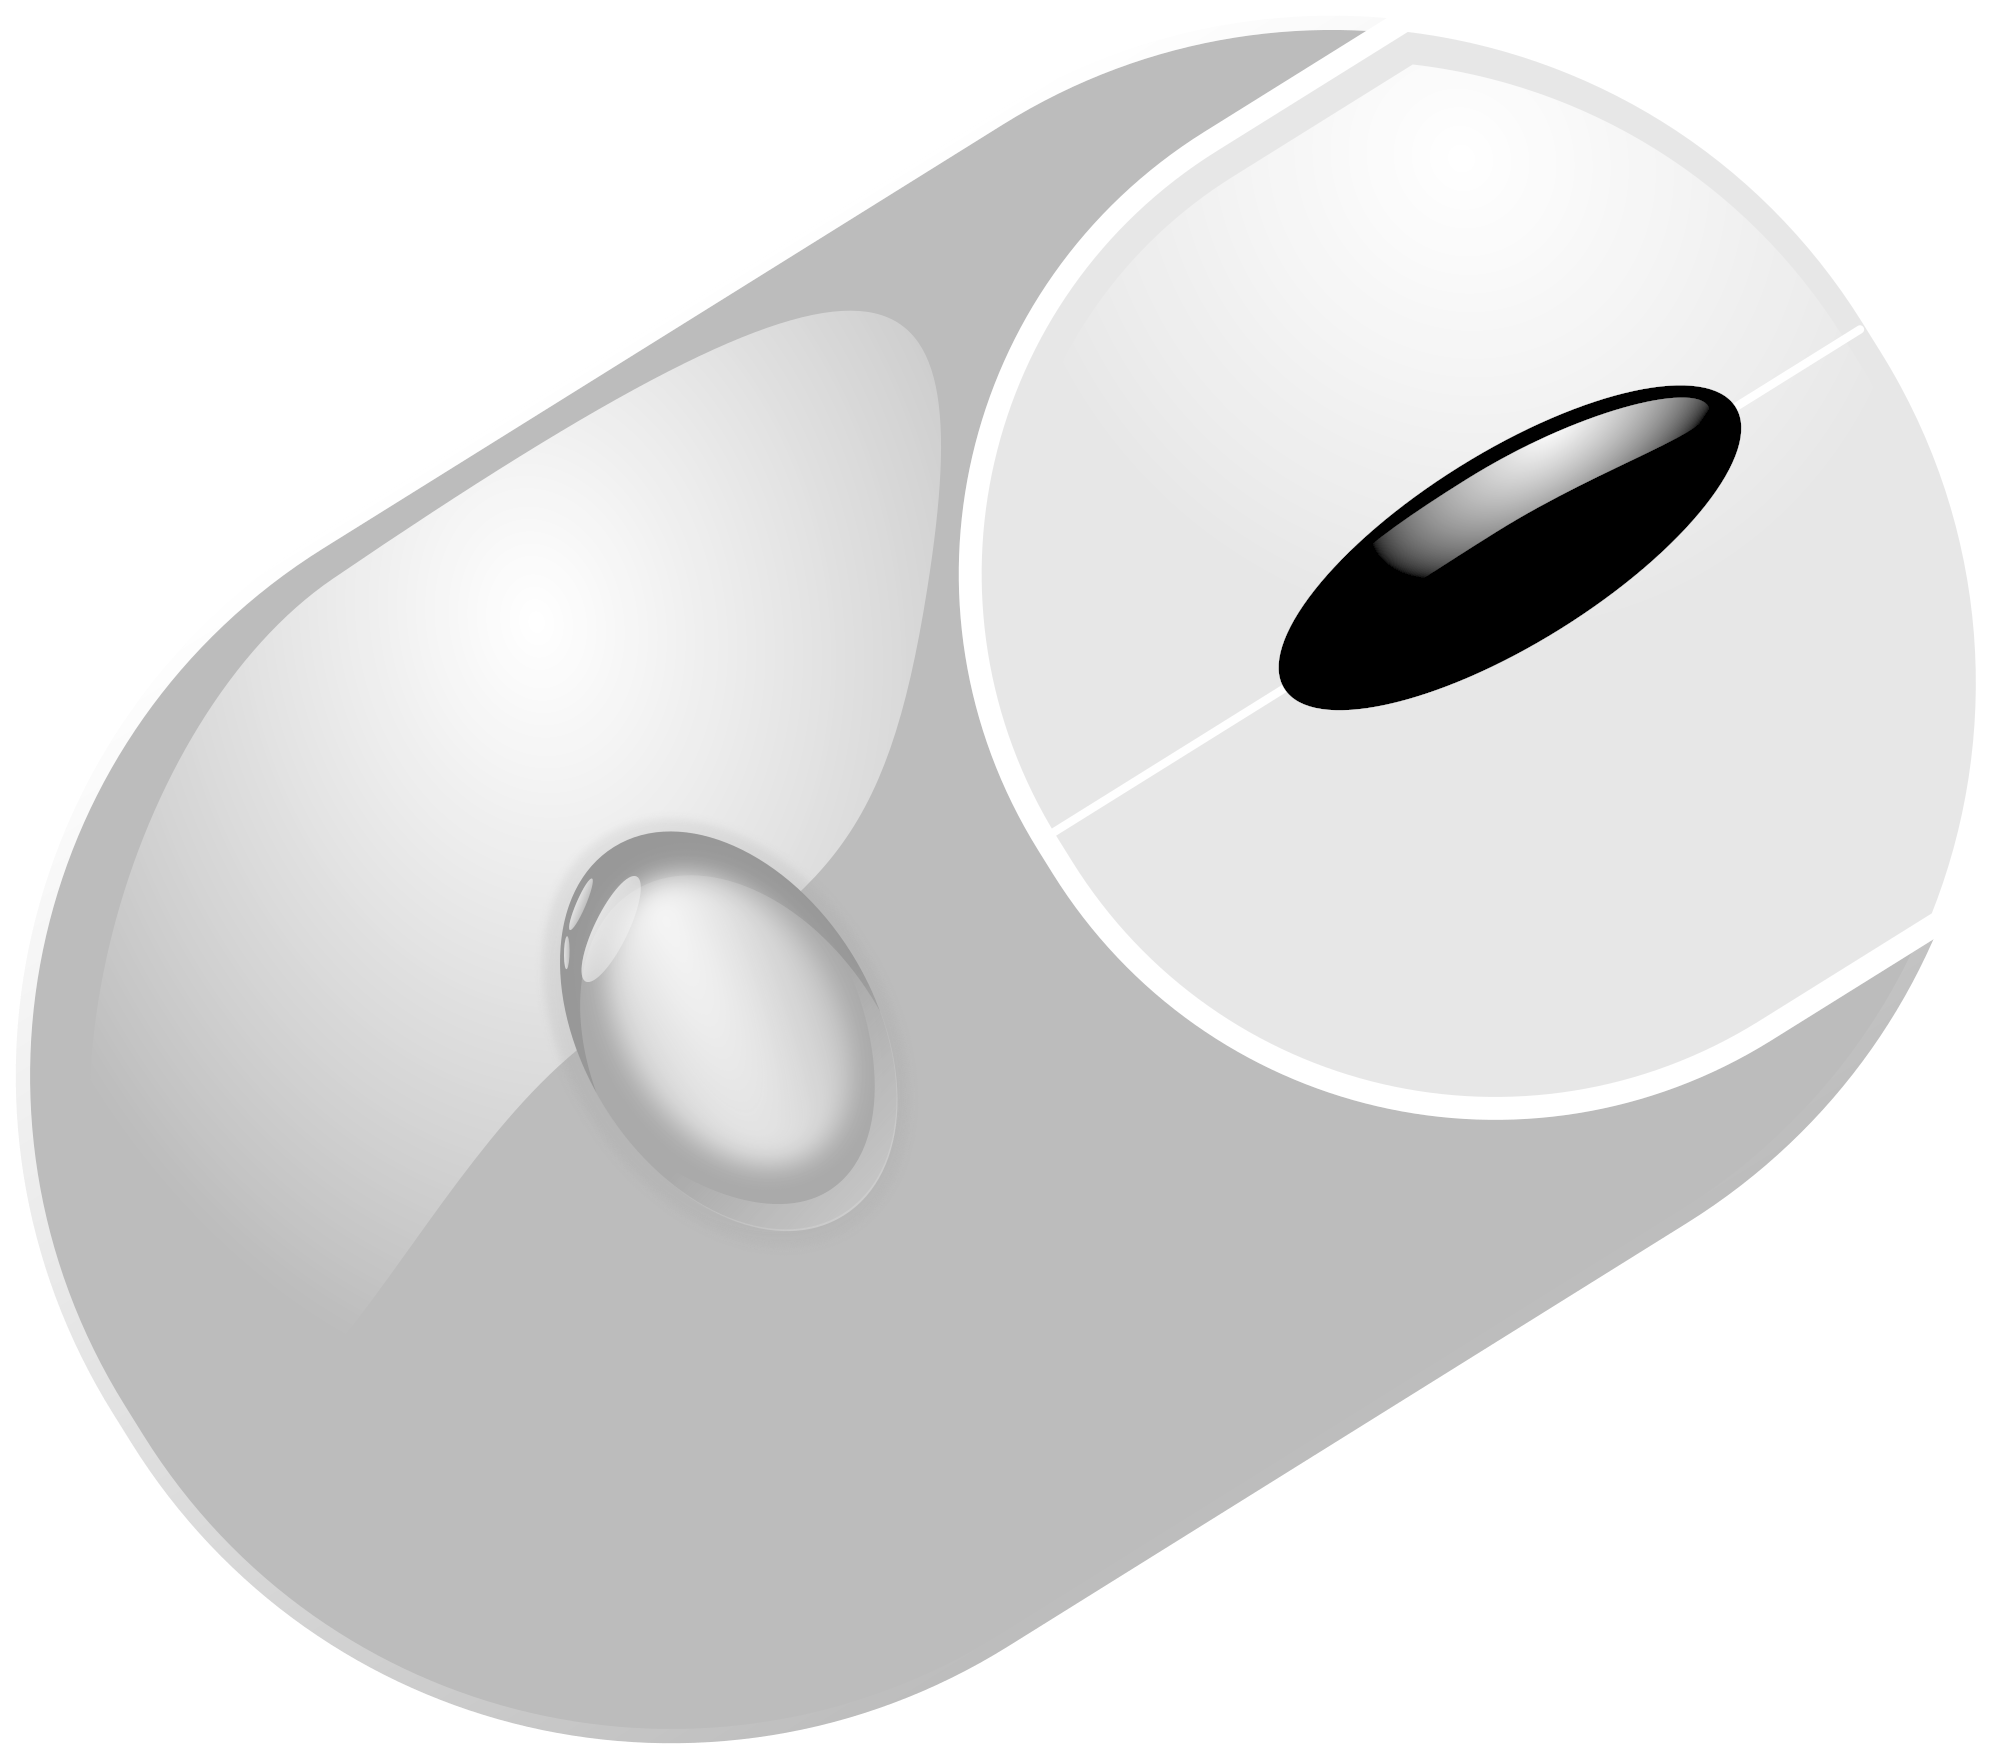 A White Object With A Black Oval Object